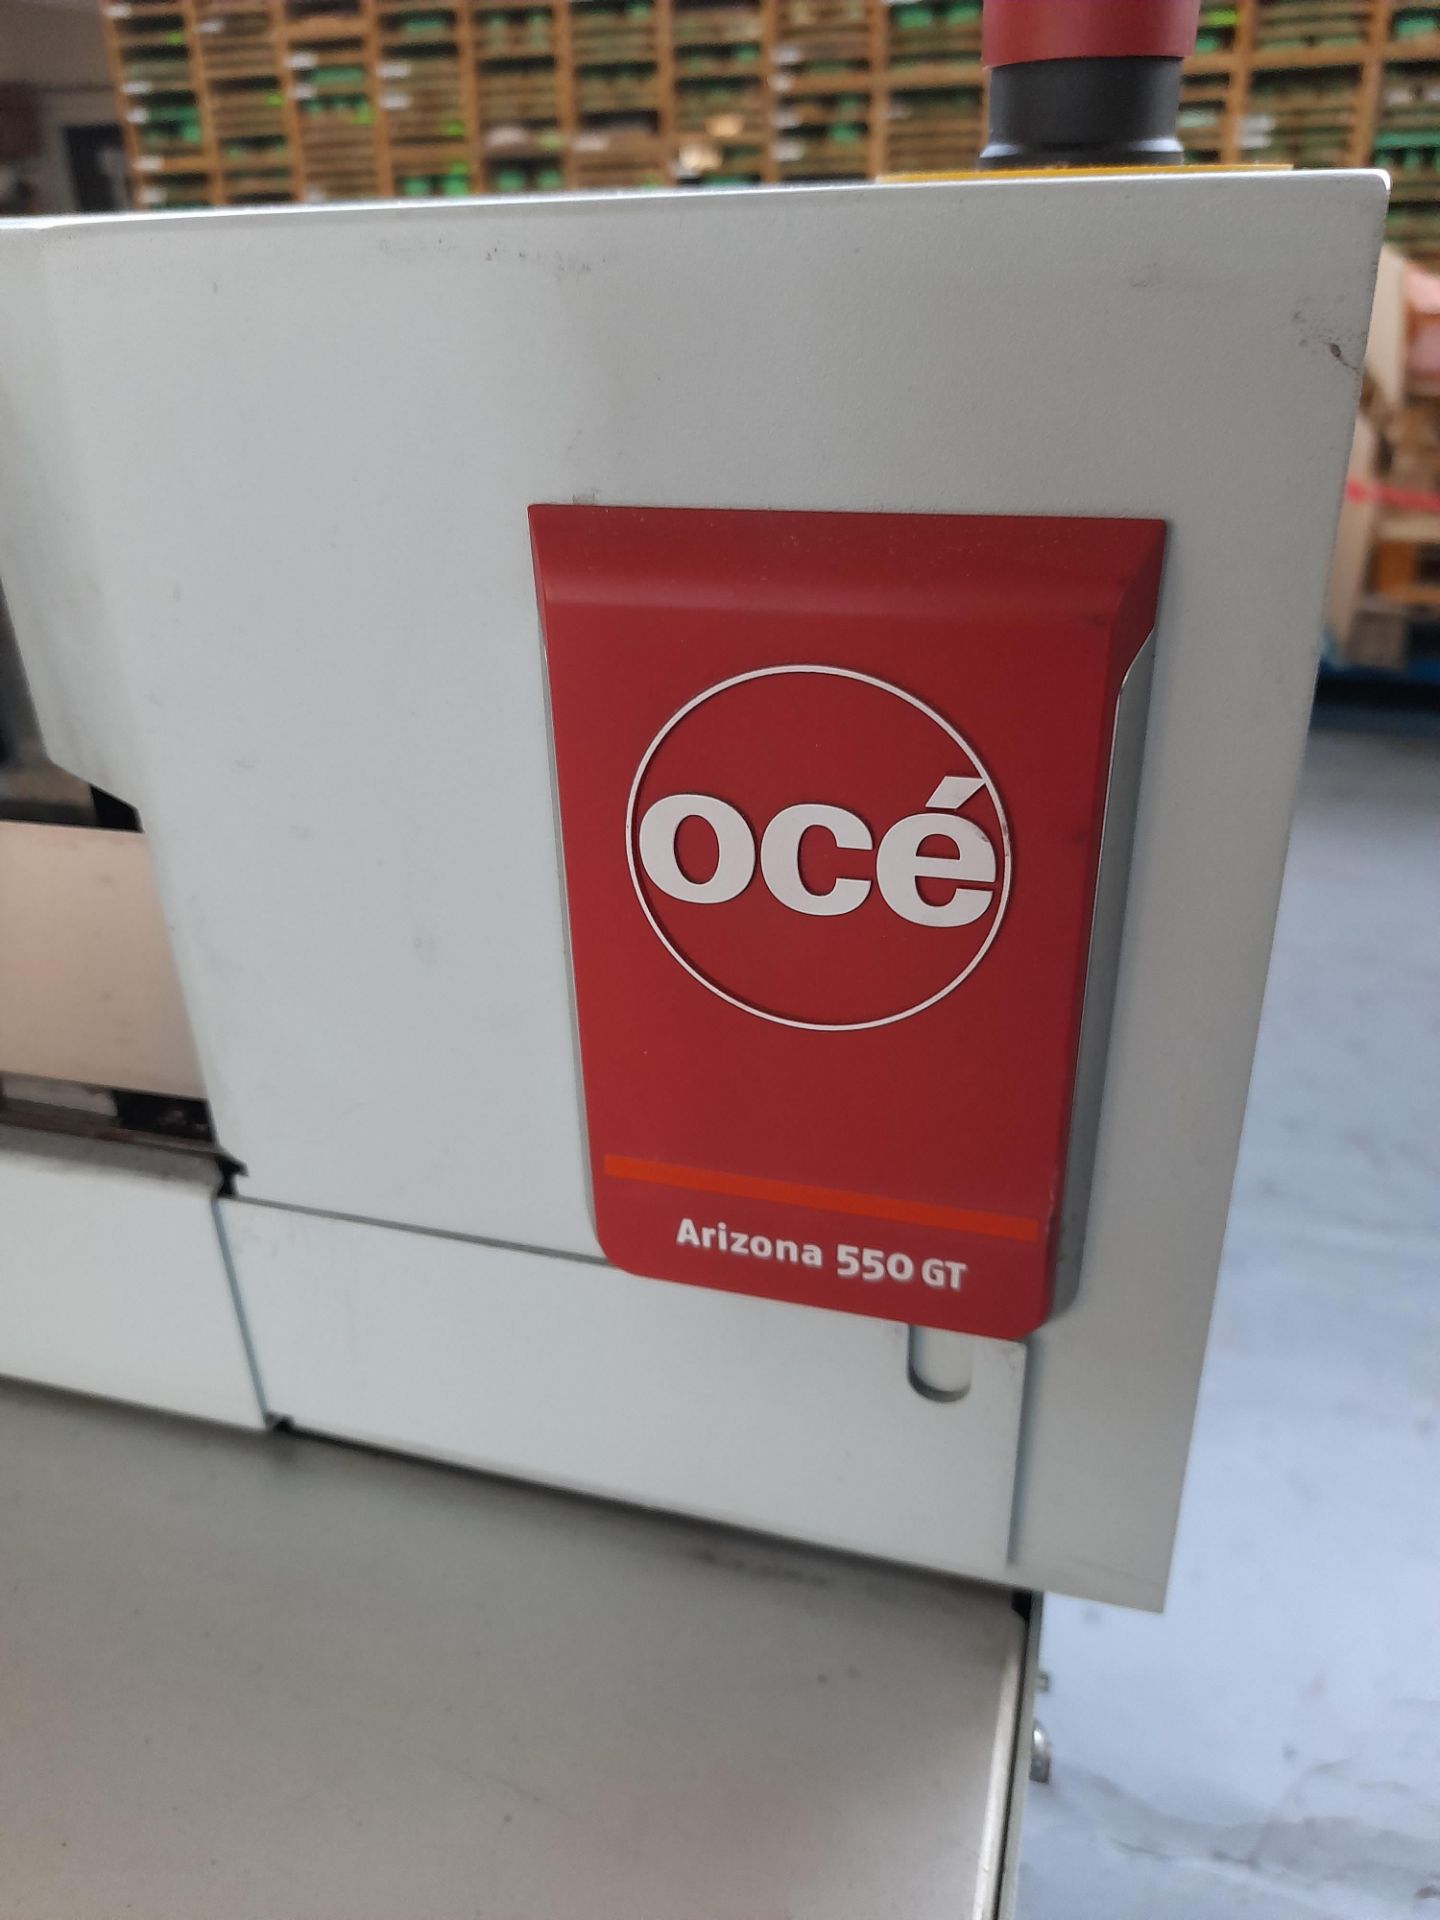 OCE Arizona 550 GT Wide Format Printer, serial number 2909210, year of manufacture July 2010 with - Image 6 of 13